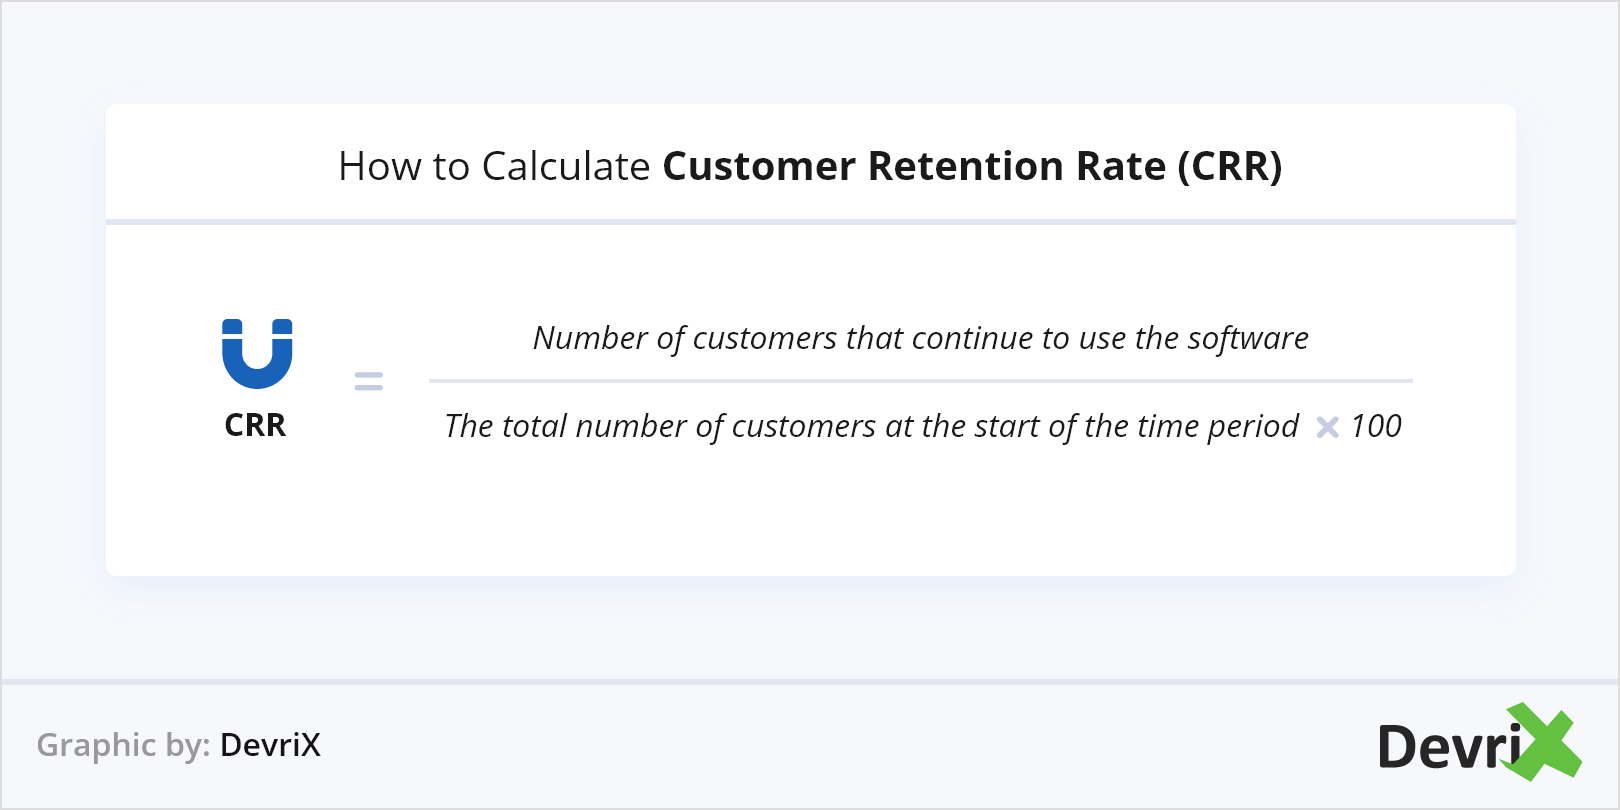 How to Calculate Customer Retention Rate (CRR)